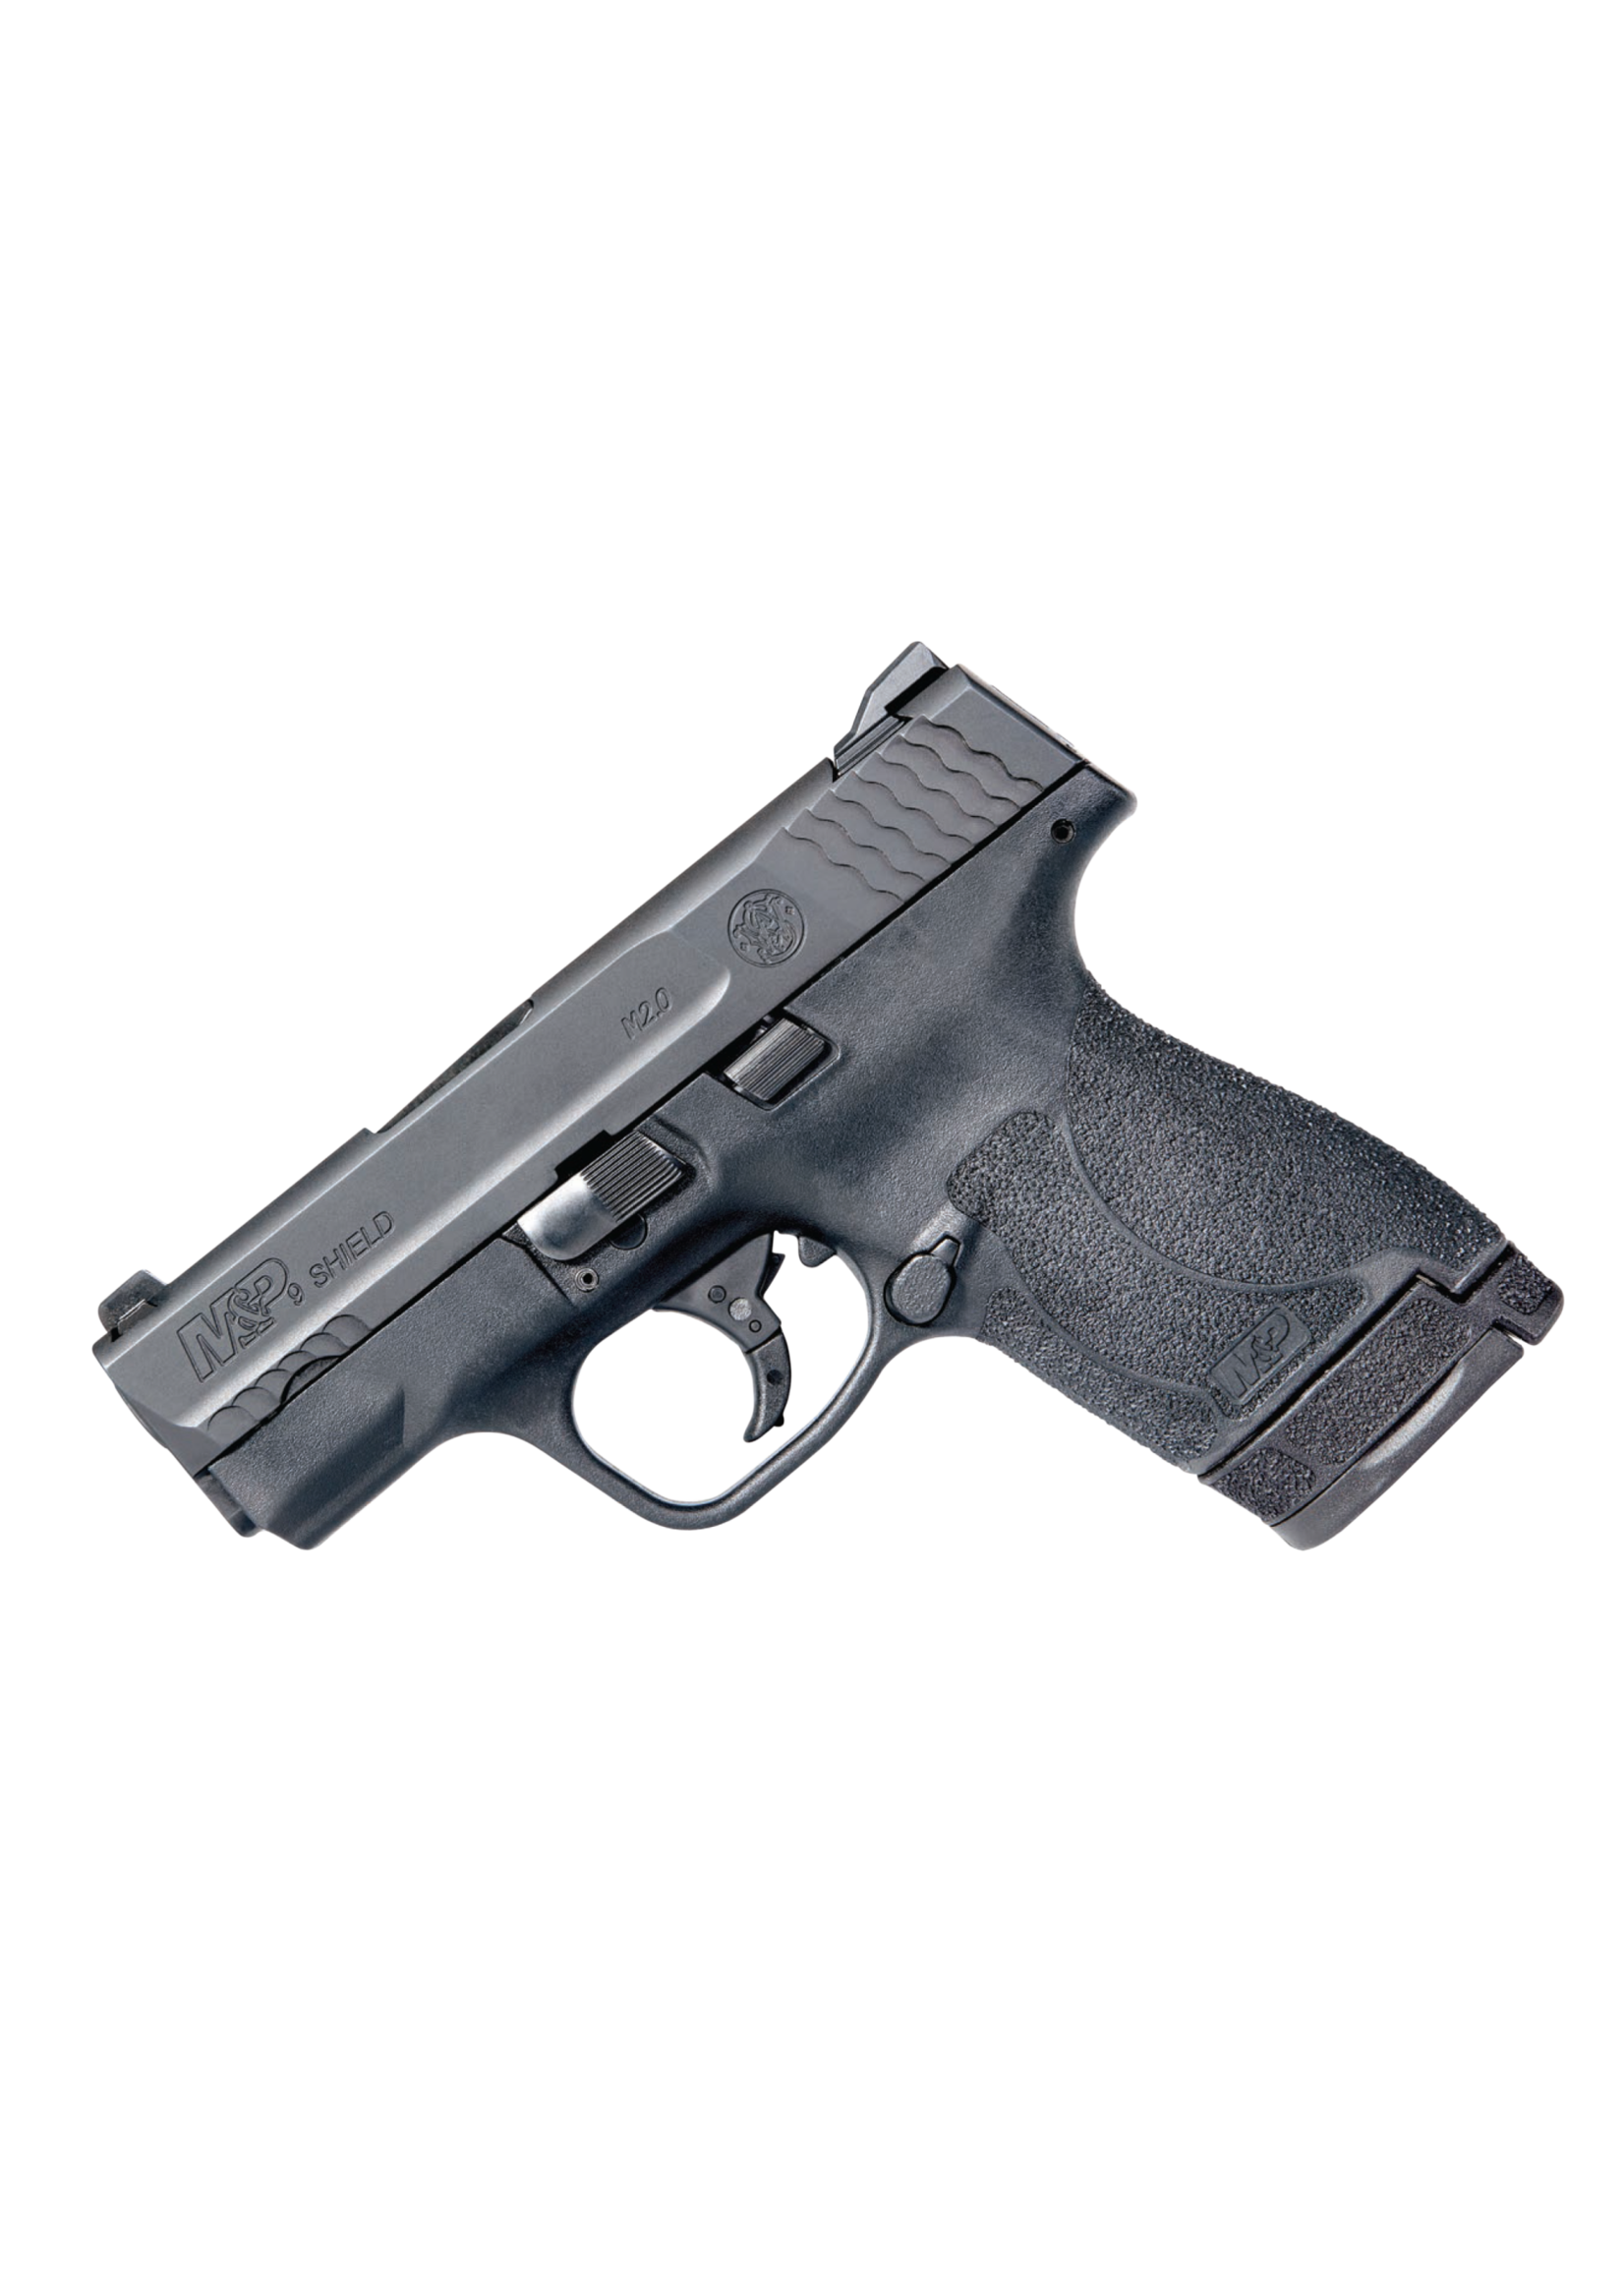 Smith and Wesson (S&W) Smith & Wesson 11810 M&P Shield M2.0 9mm Luger 3.10" Barrel 7+1 Or 8+1, Black Polymer Frame, Armornite Stainless Steel Slide, Tritium Night Sights, No Manual Safety